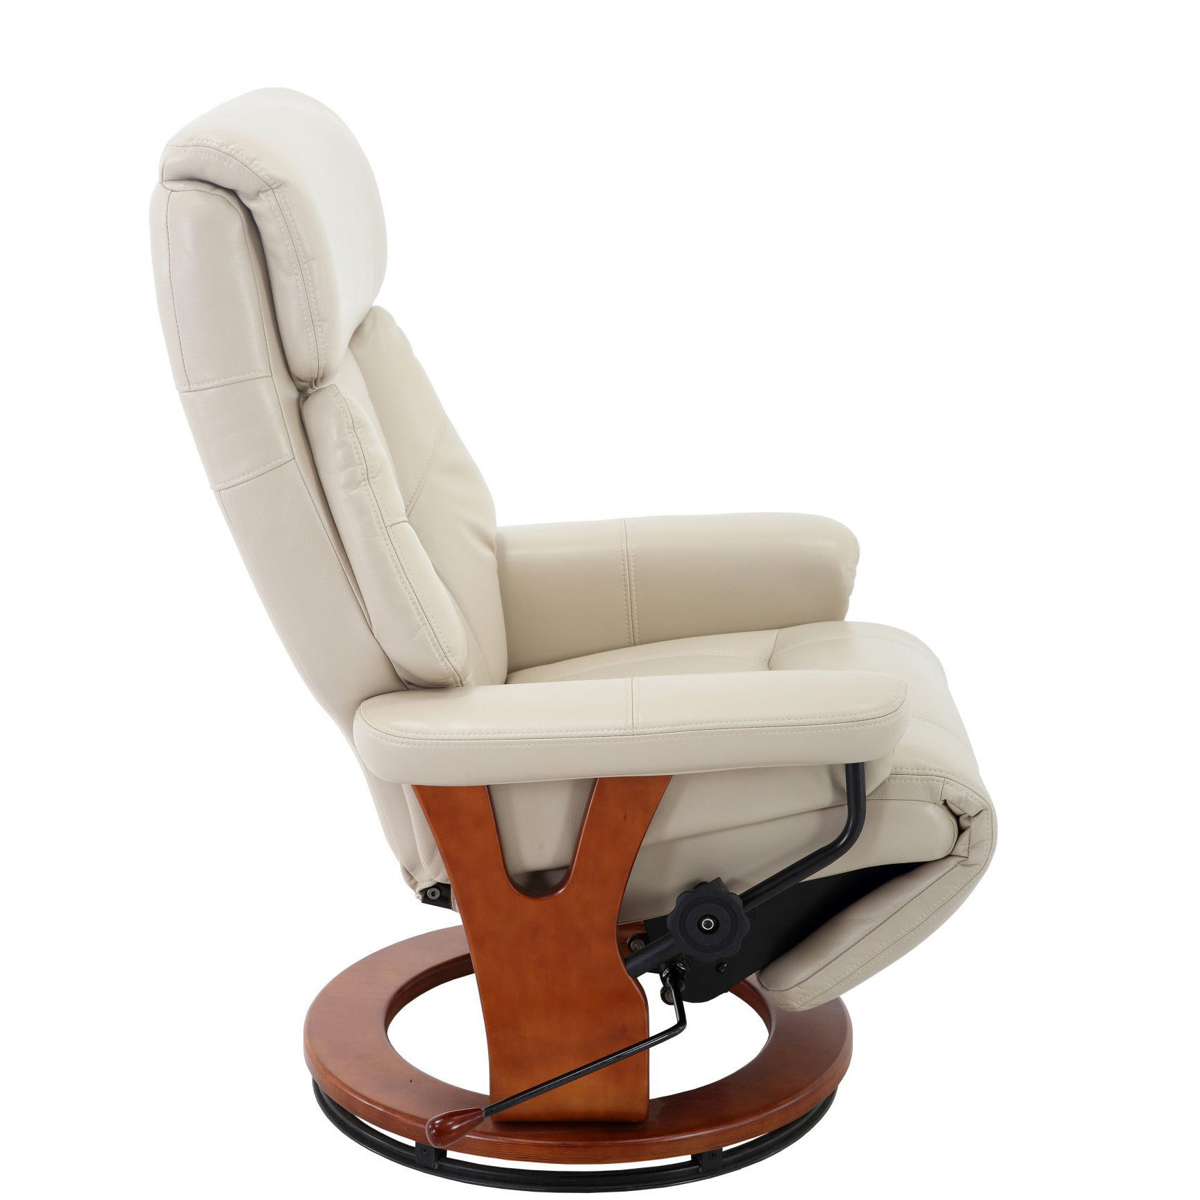 Picture of Bismark Recliner in Cobblestone Air Leather